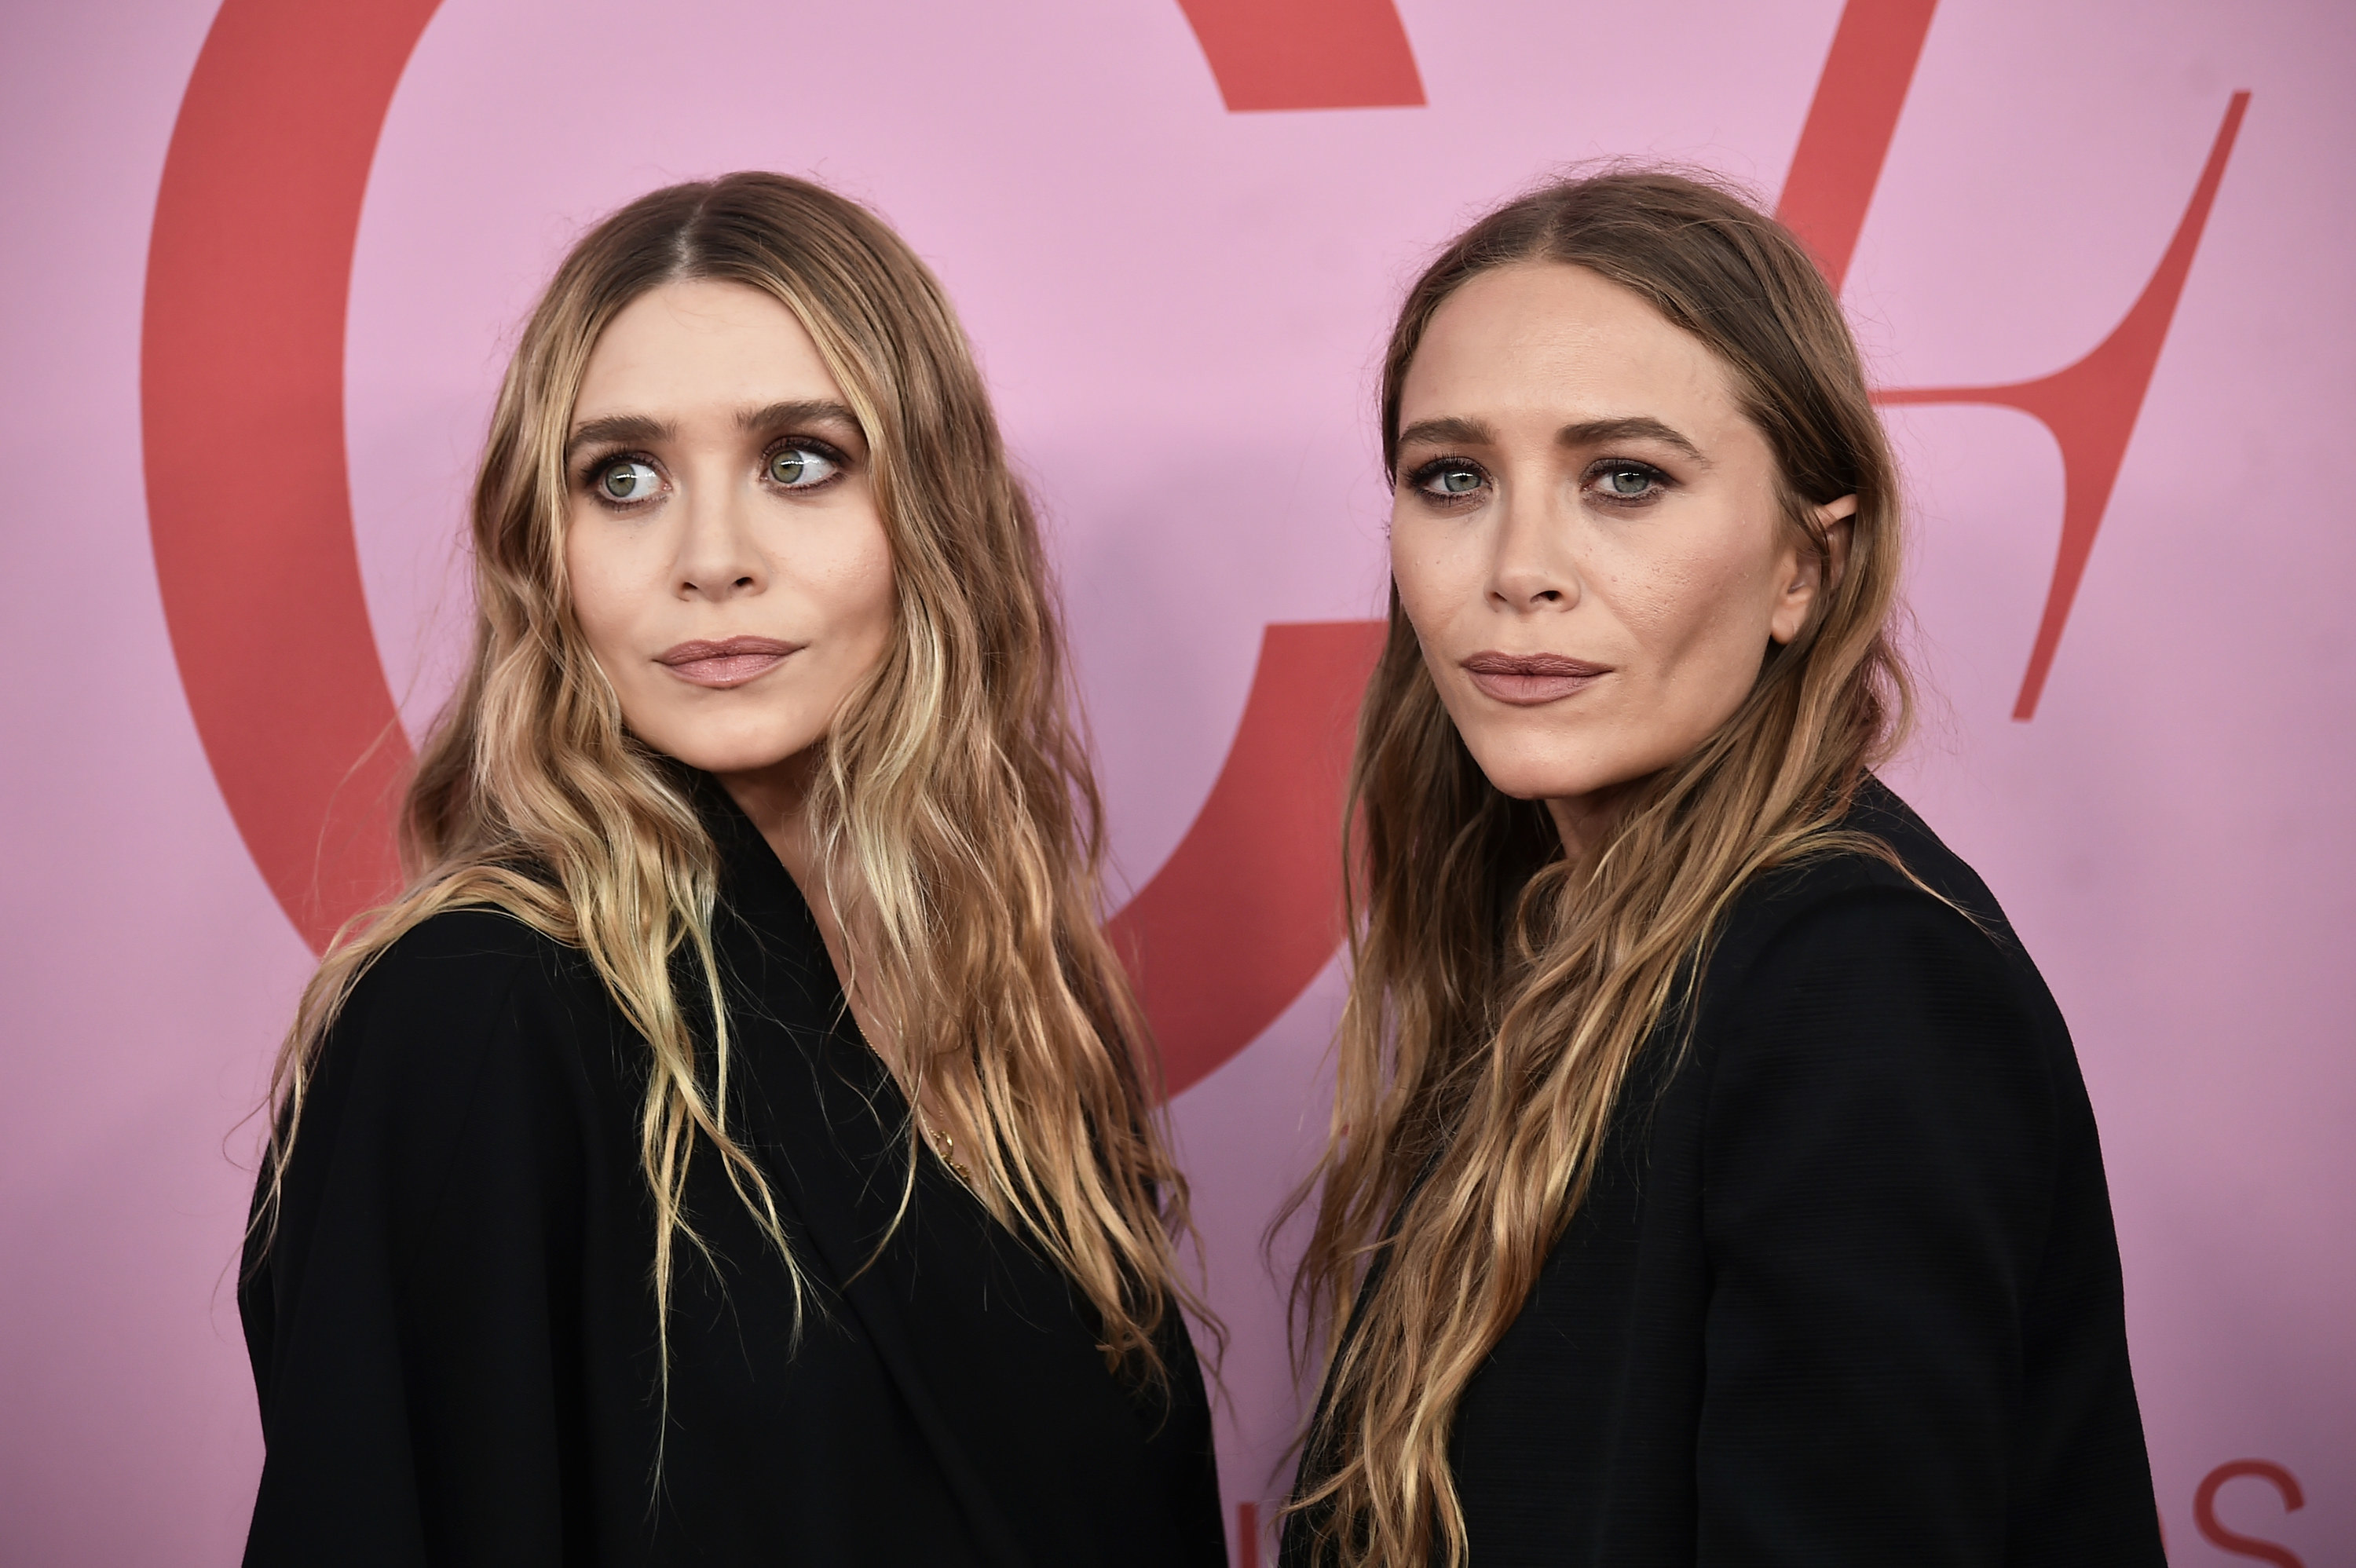 Ashley and Mary-Kate Olsen on the red carpet